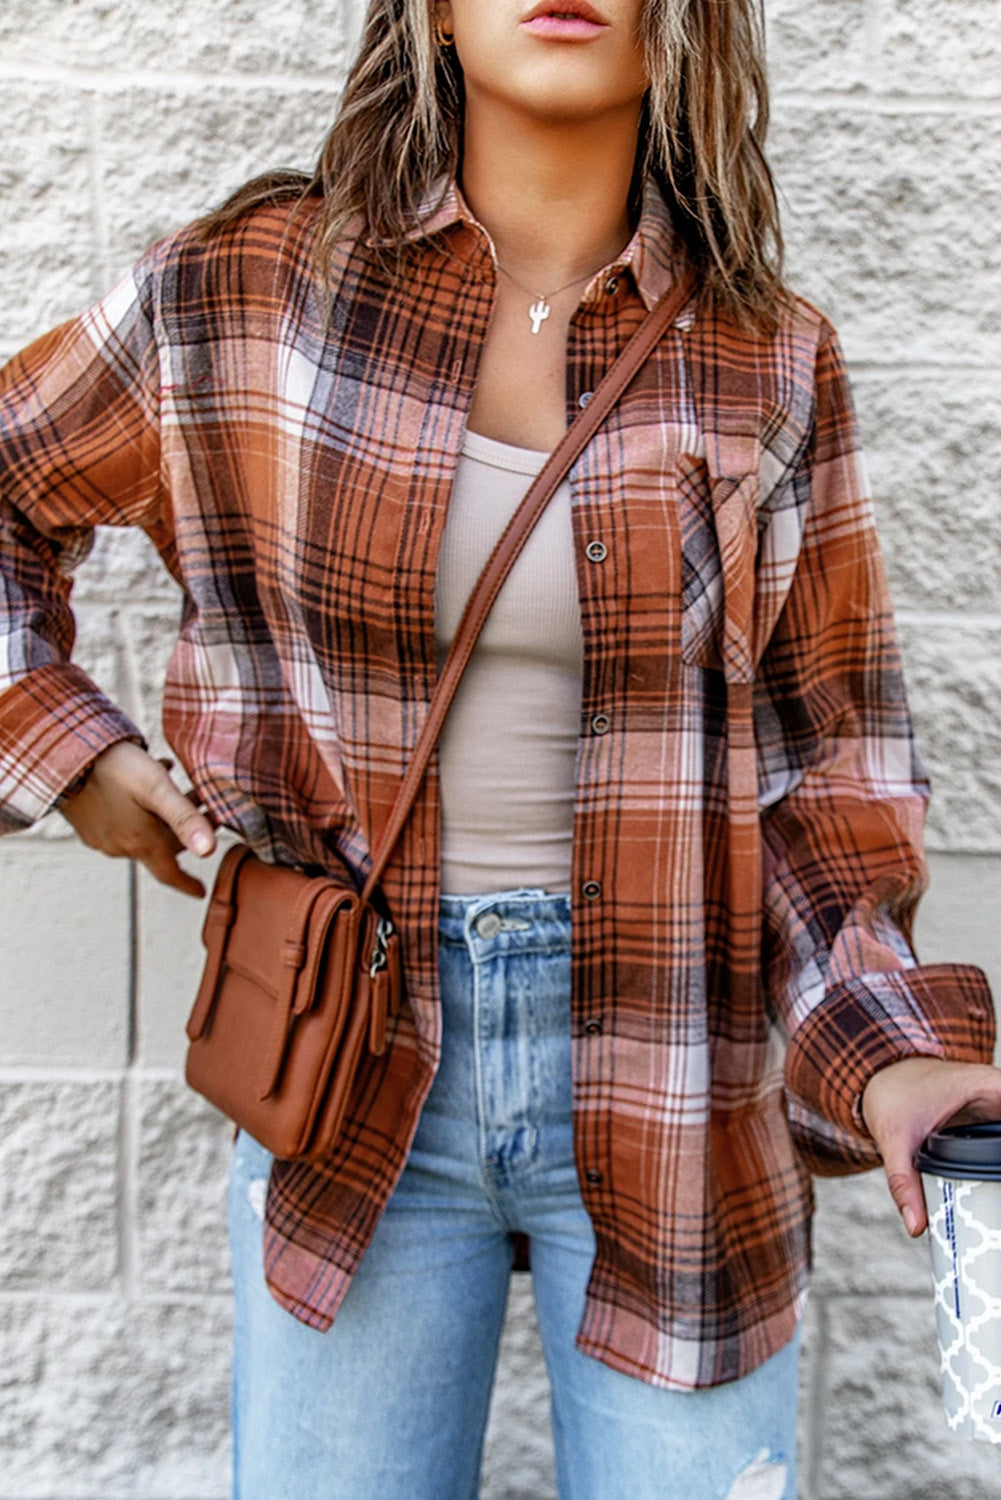 Gray Collared Neck Long Sleeve Plaid Shirt Sentient Beauty Fashions Apparel & Accessories